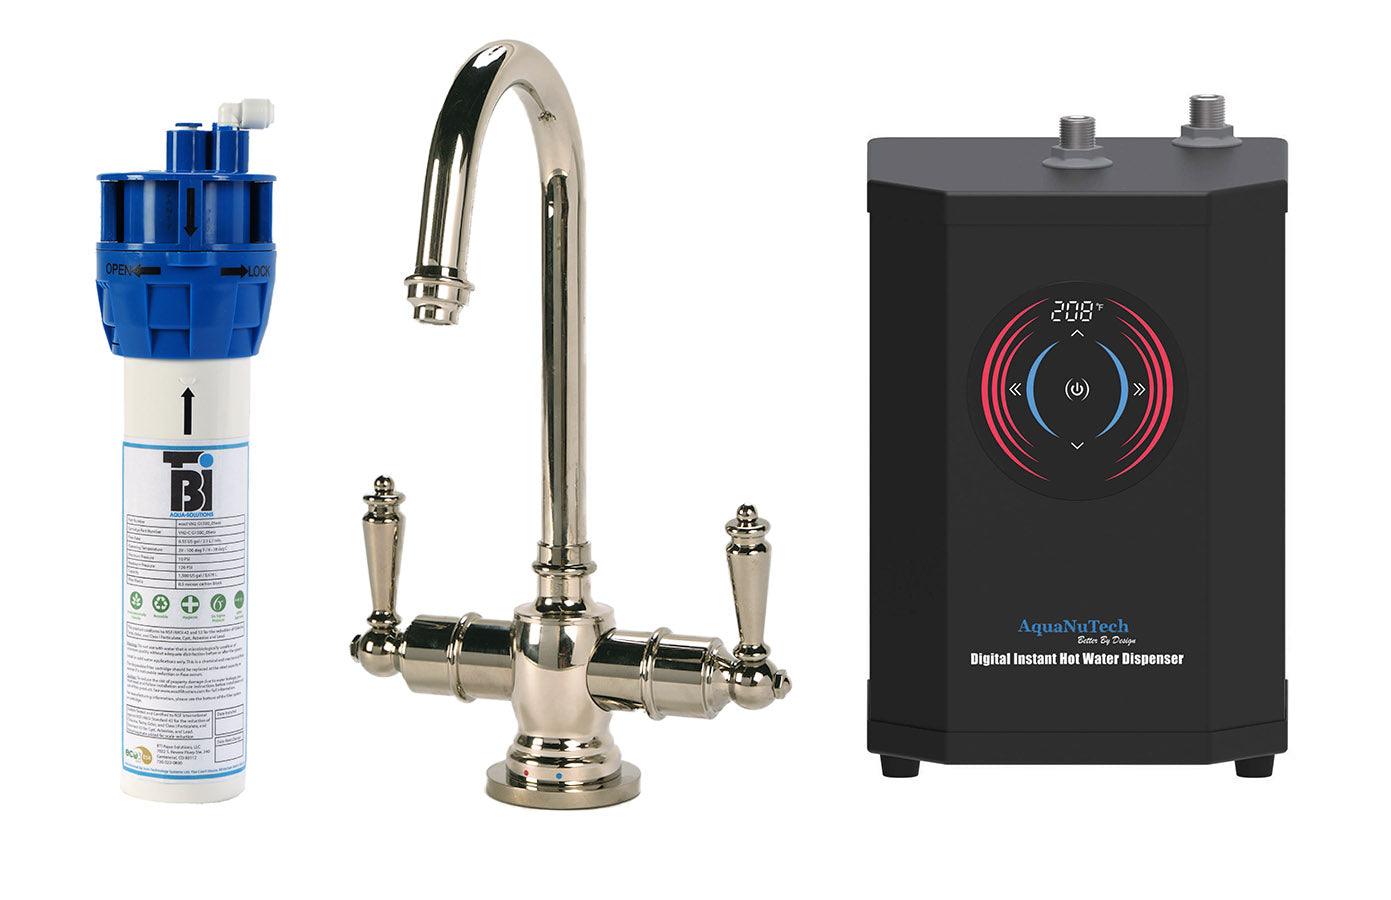 Filtration/Hot Water Combo - Traditional C-Spout Faucet With Digital Instant Hot Water Dispenser and Filtration System. Polished nickel